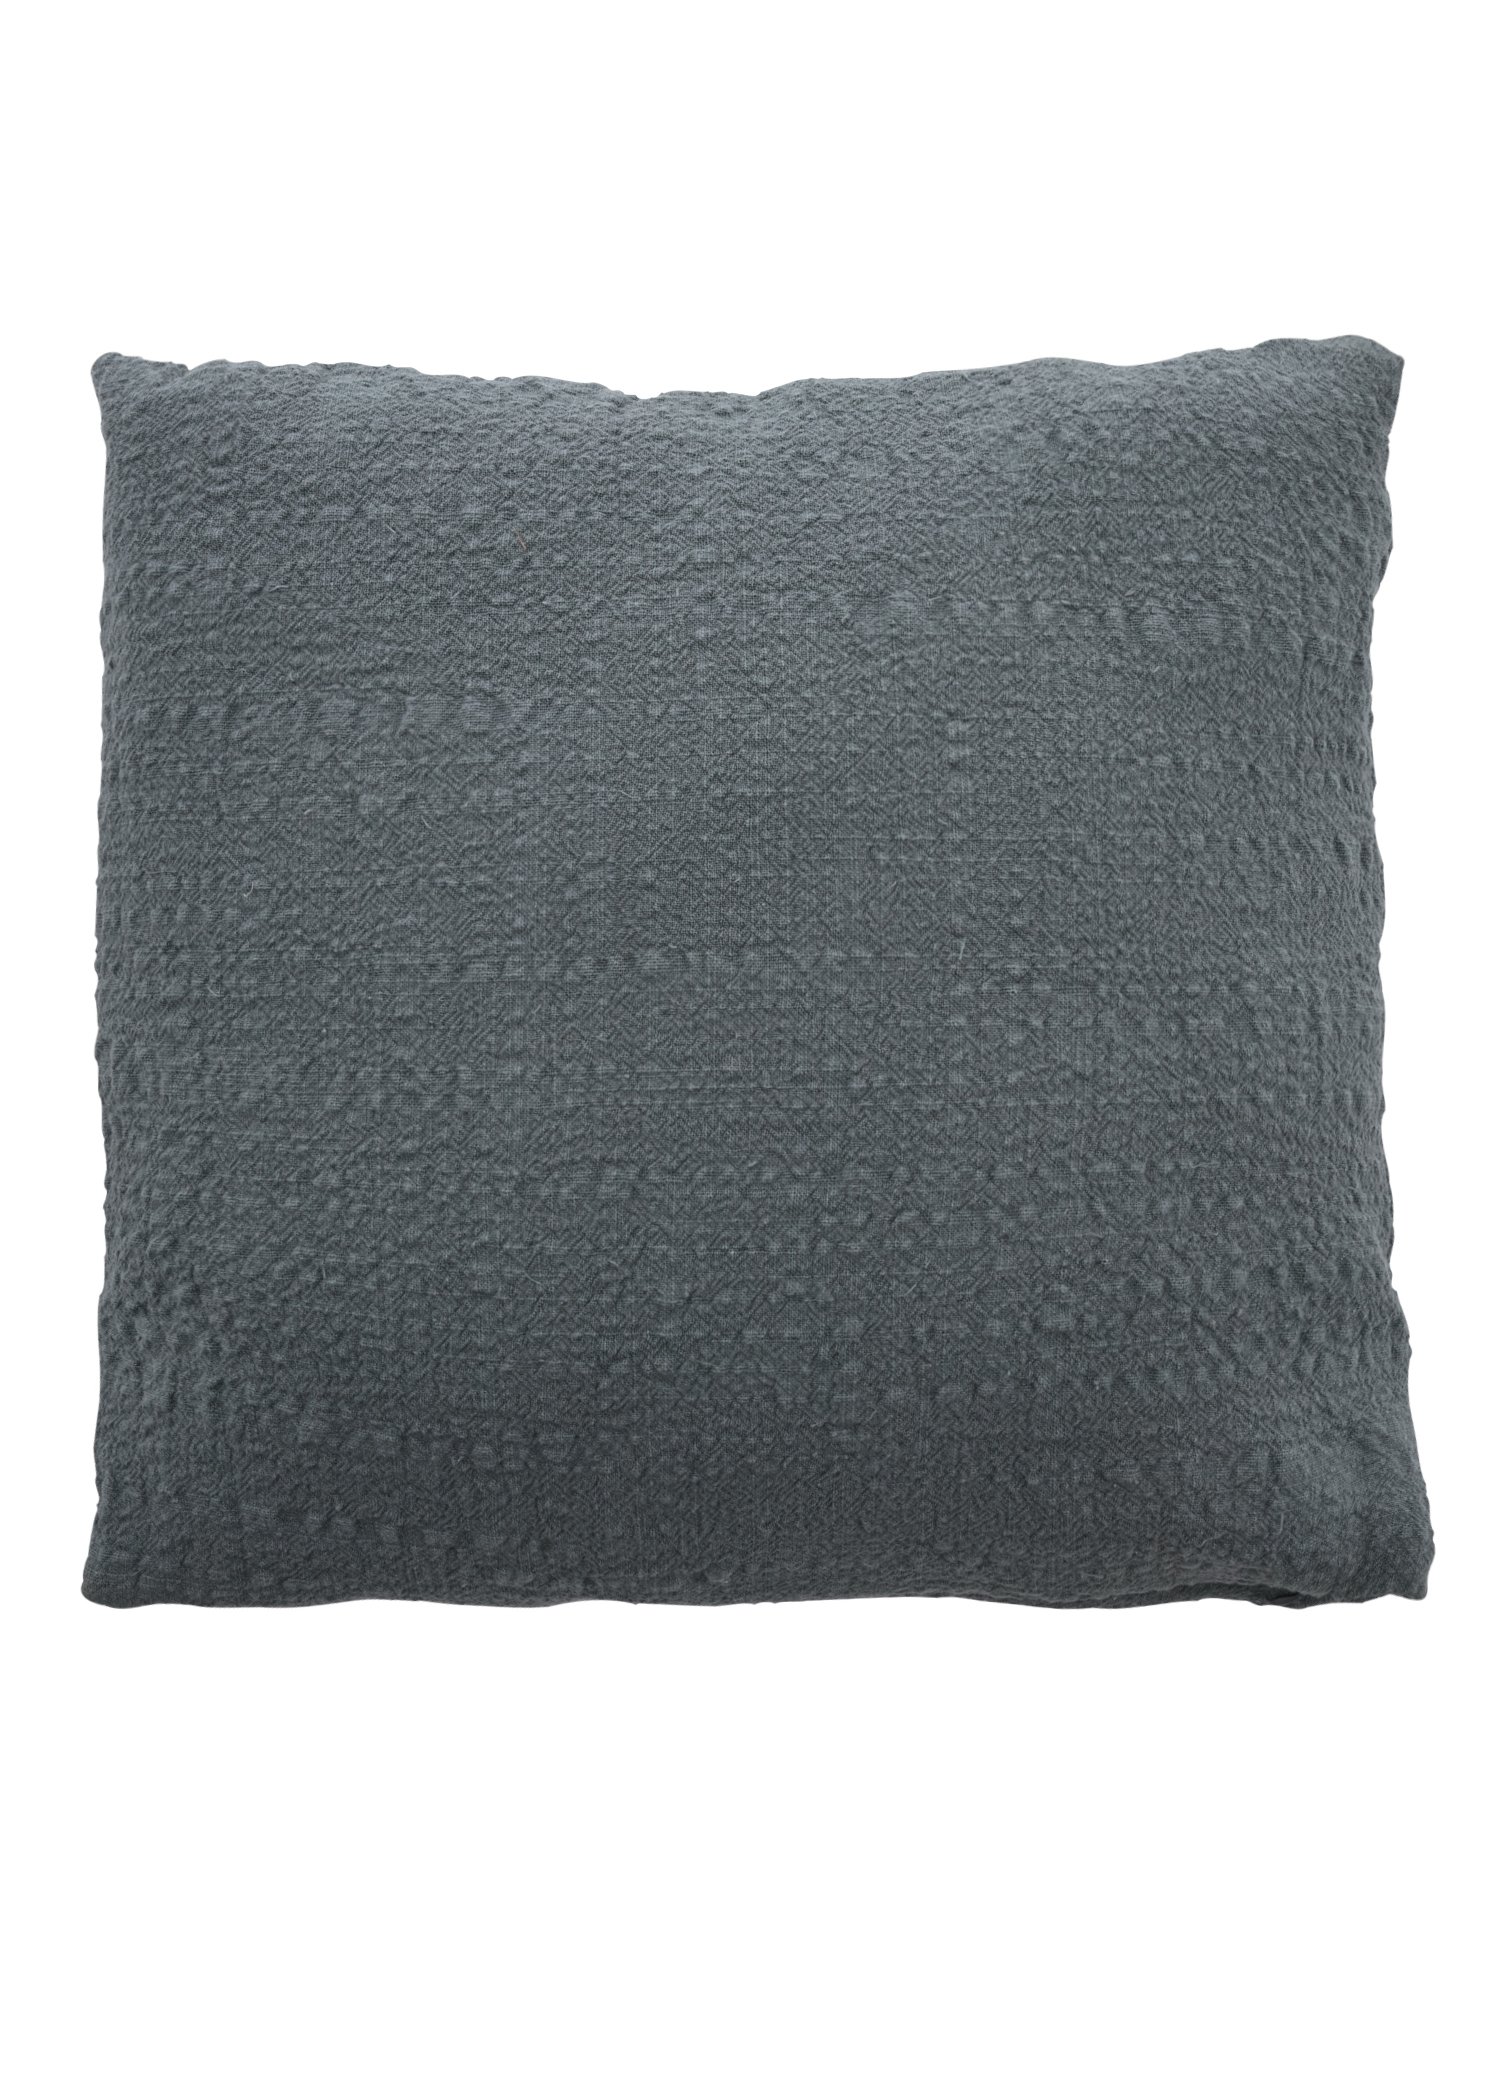 Solid cushion cover